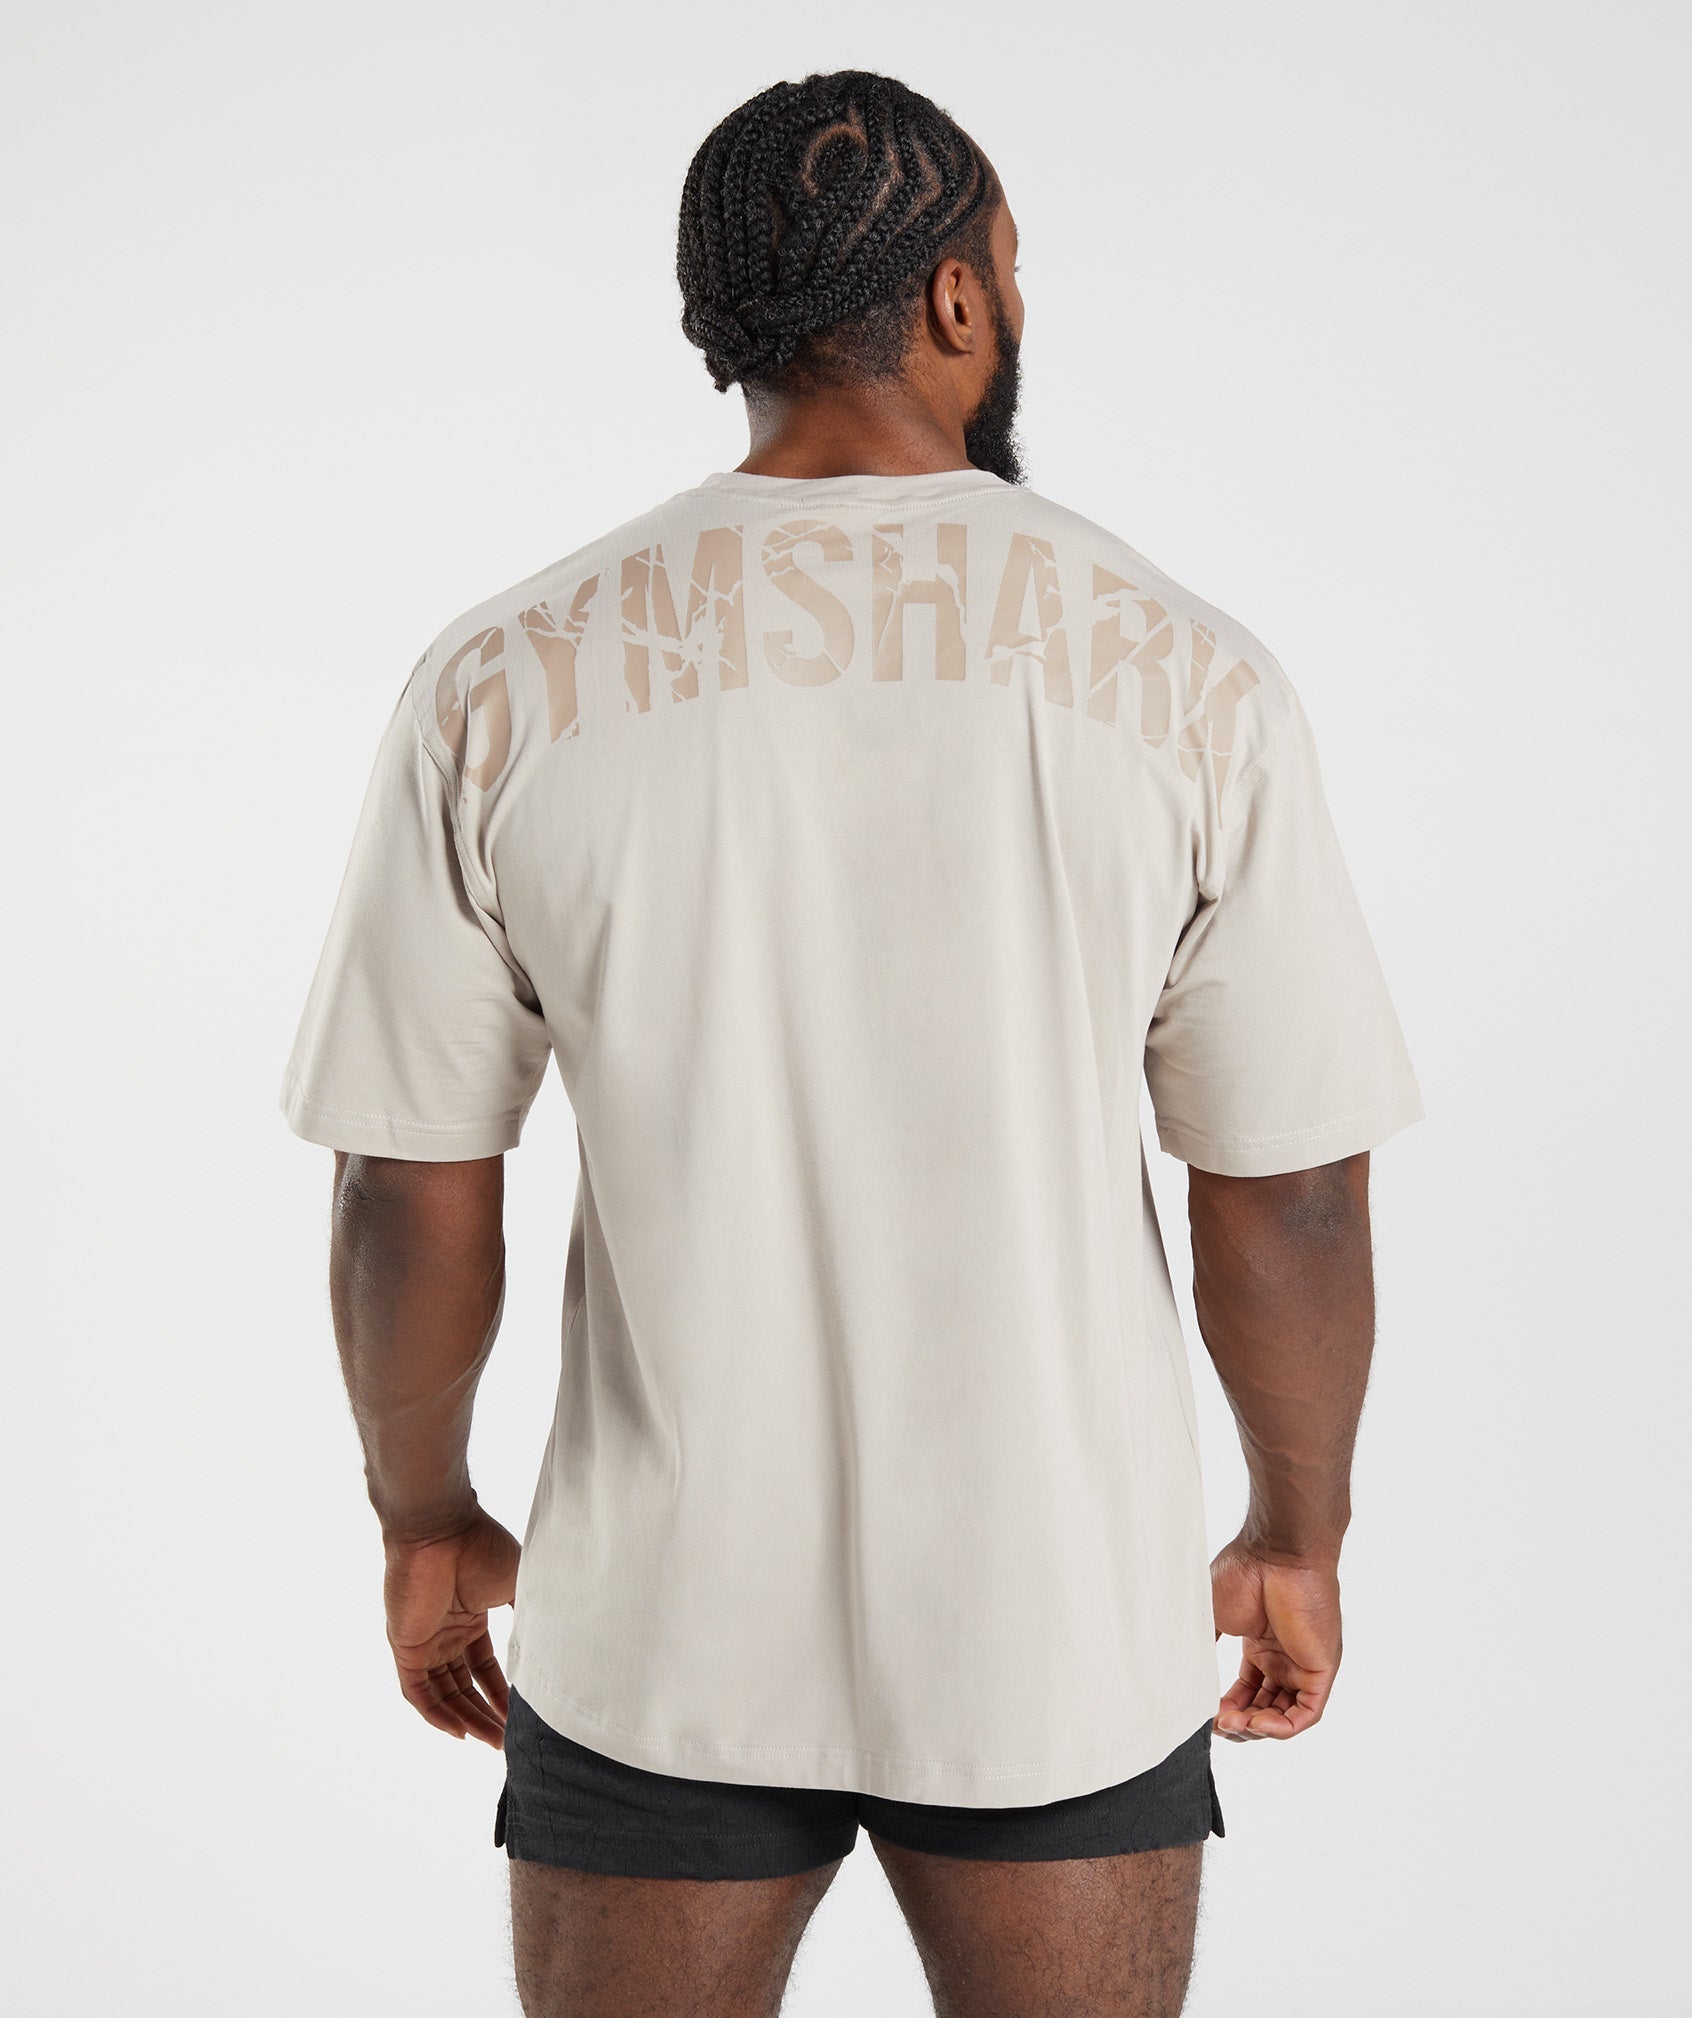 Power T-Shirt in Pebble Grey - view 2